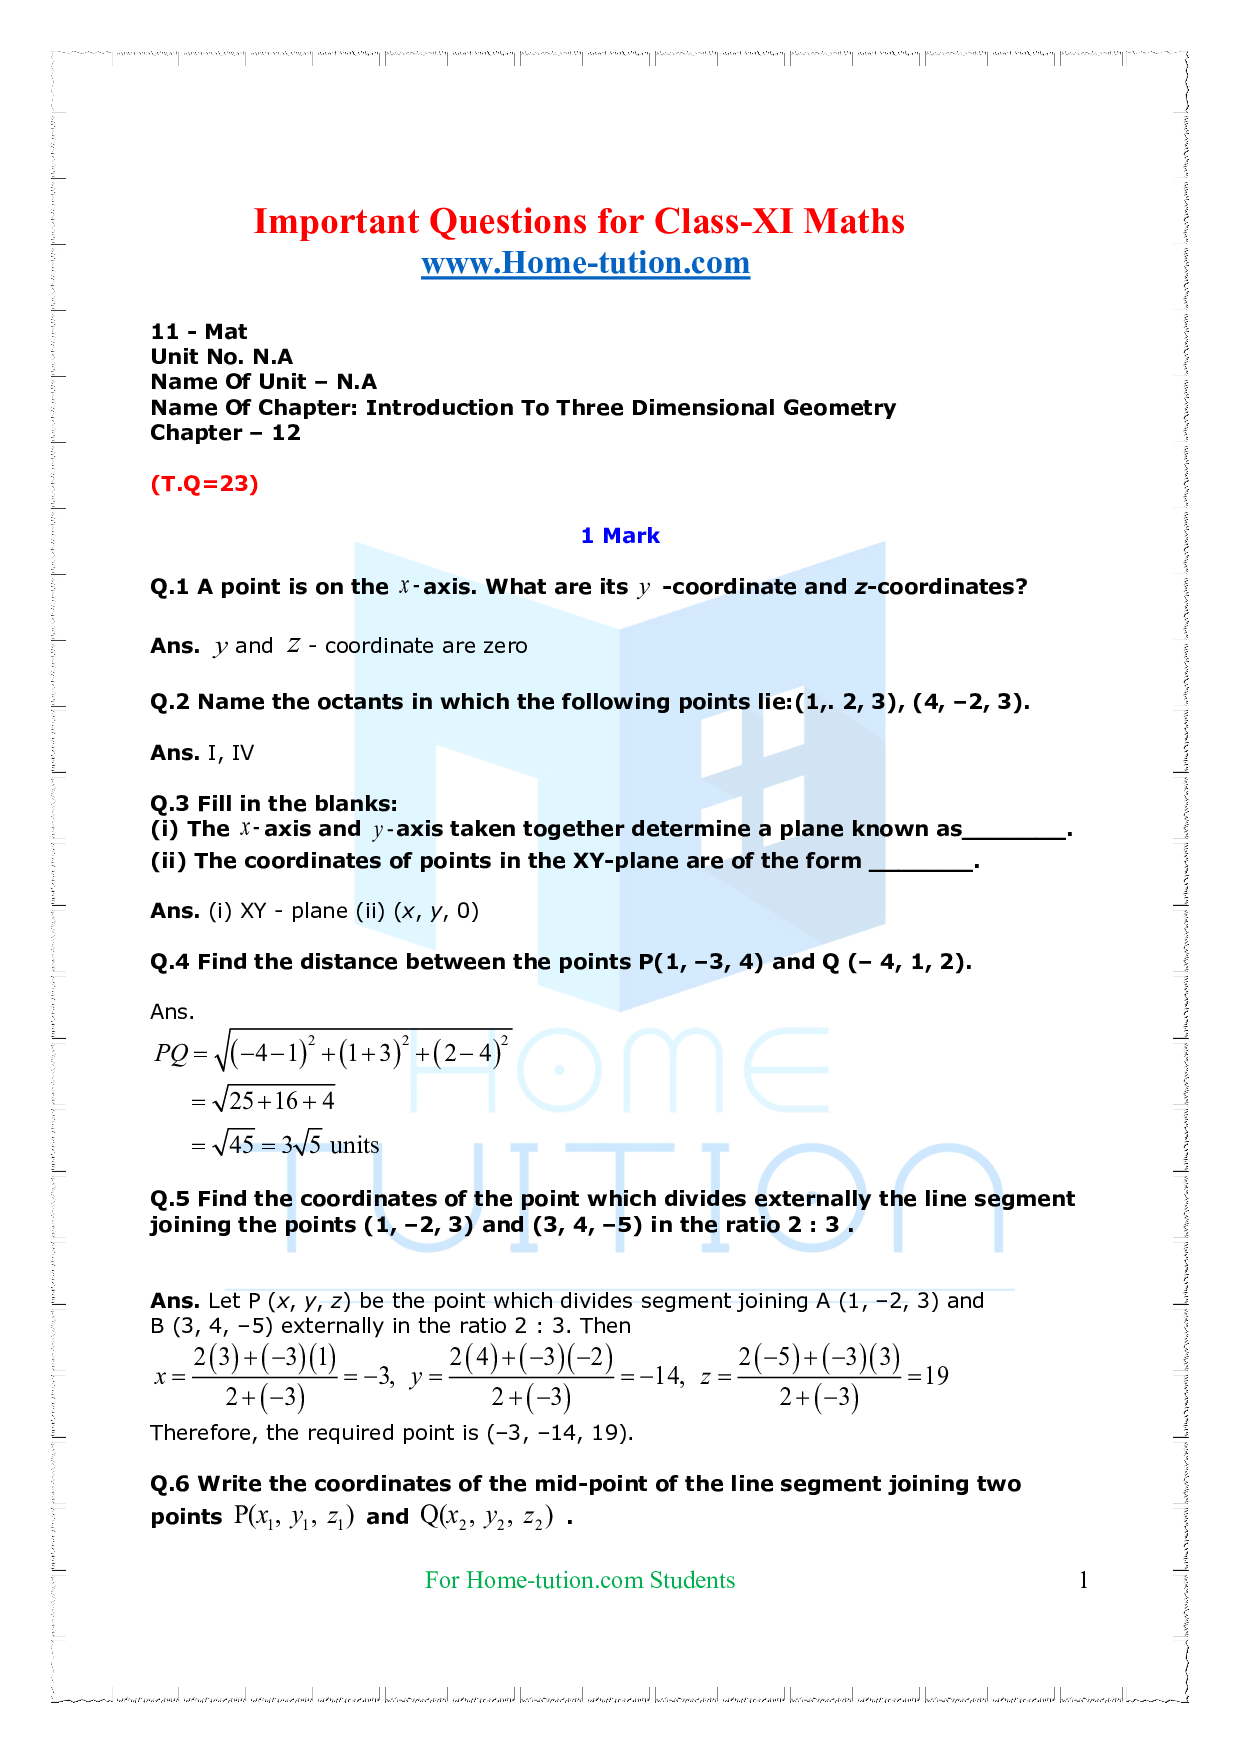 Chapter 12 Introduction to Three-Dimensional Geometry Questions